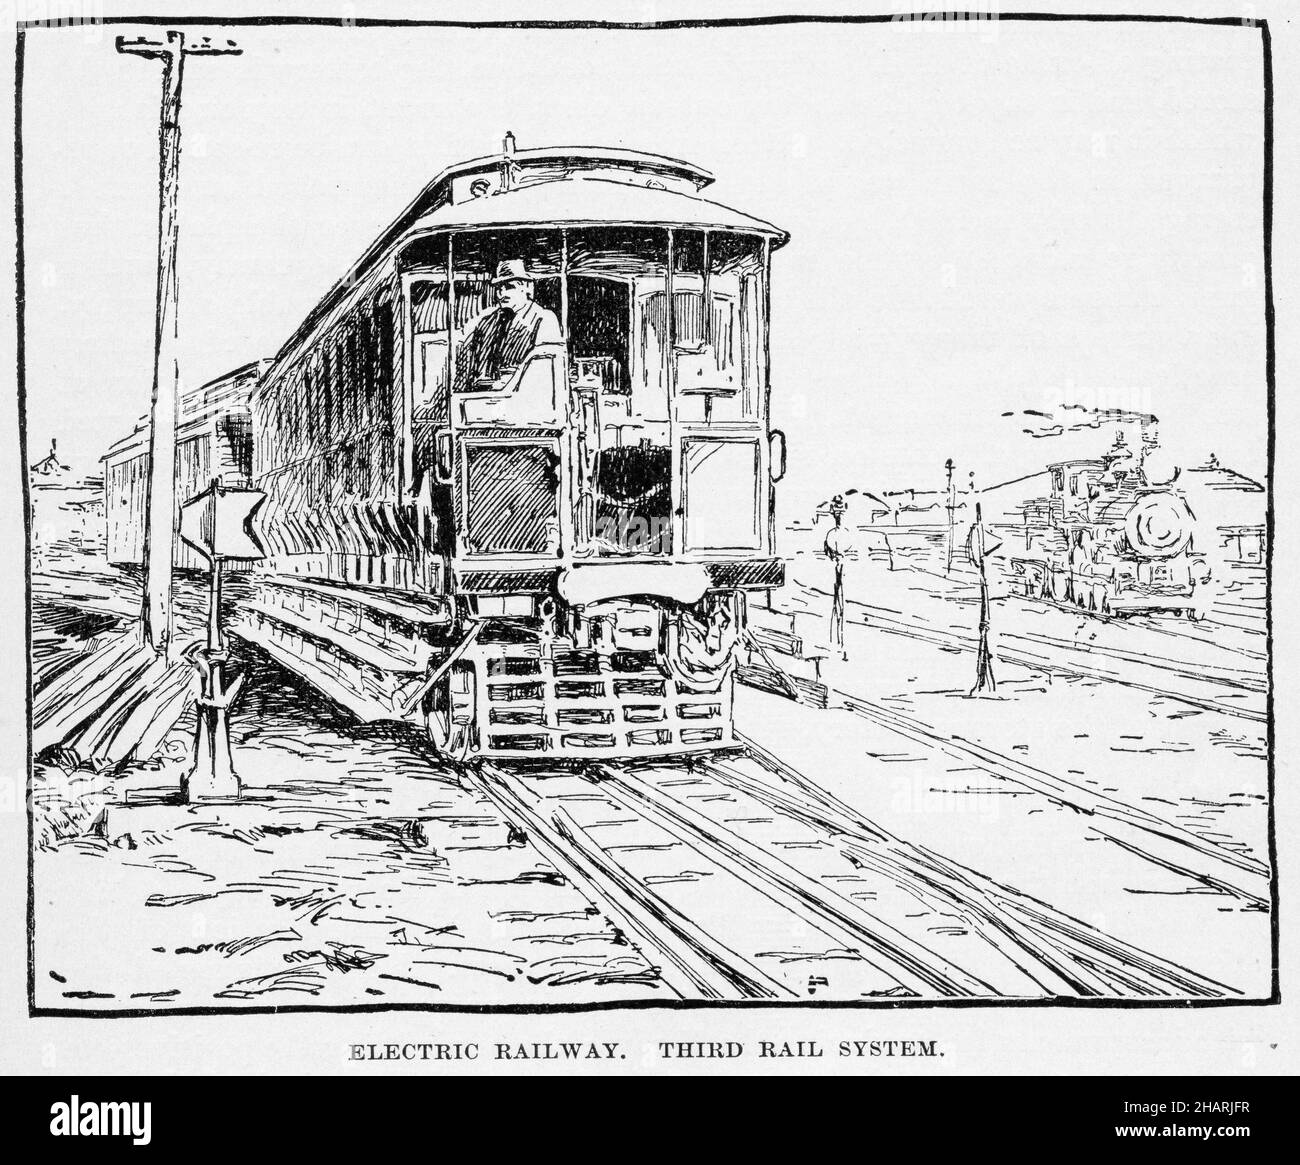 Engraving of an electric railway with a third rail section, circa 1900 Stock Photo